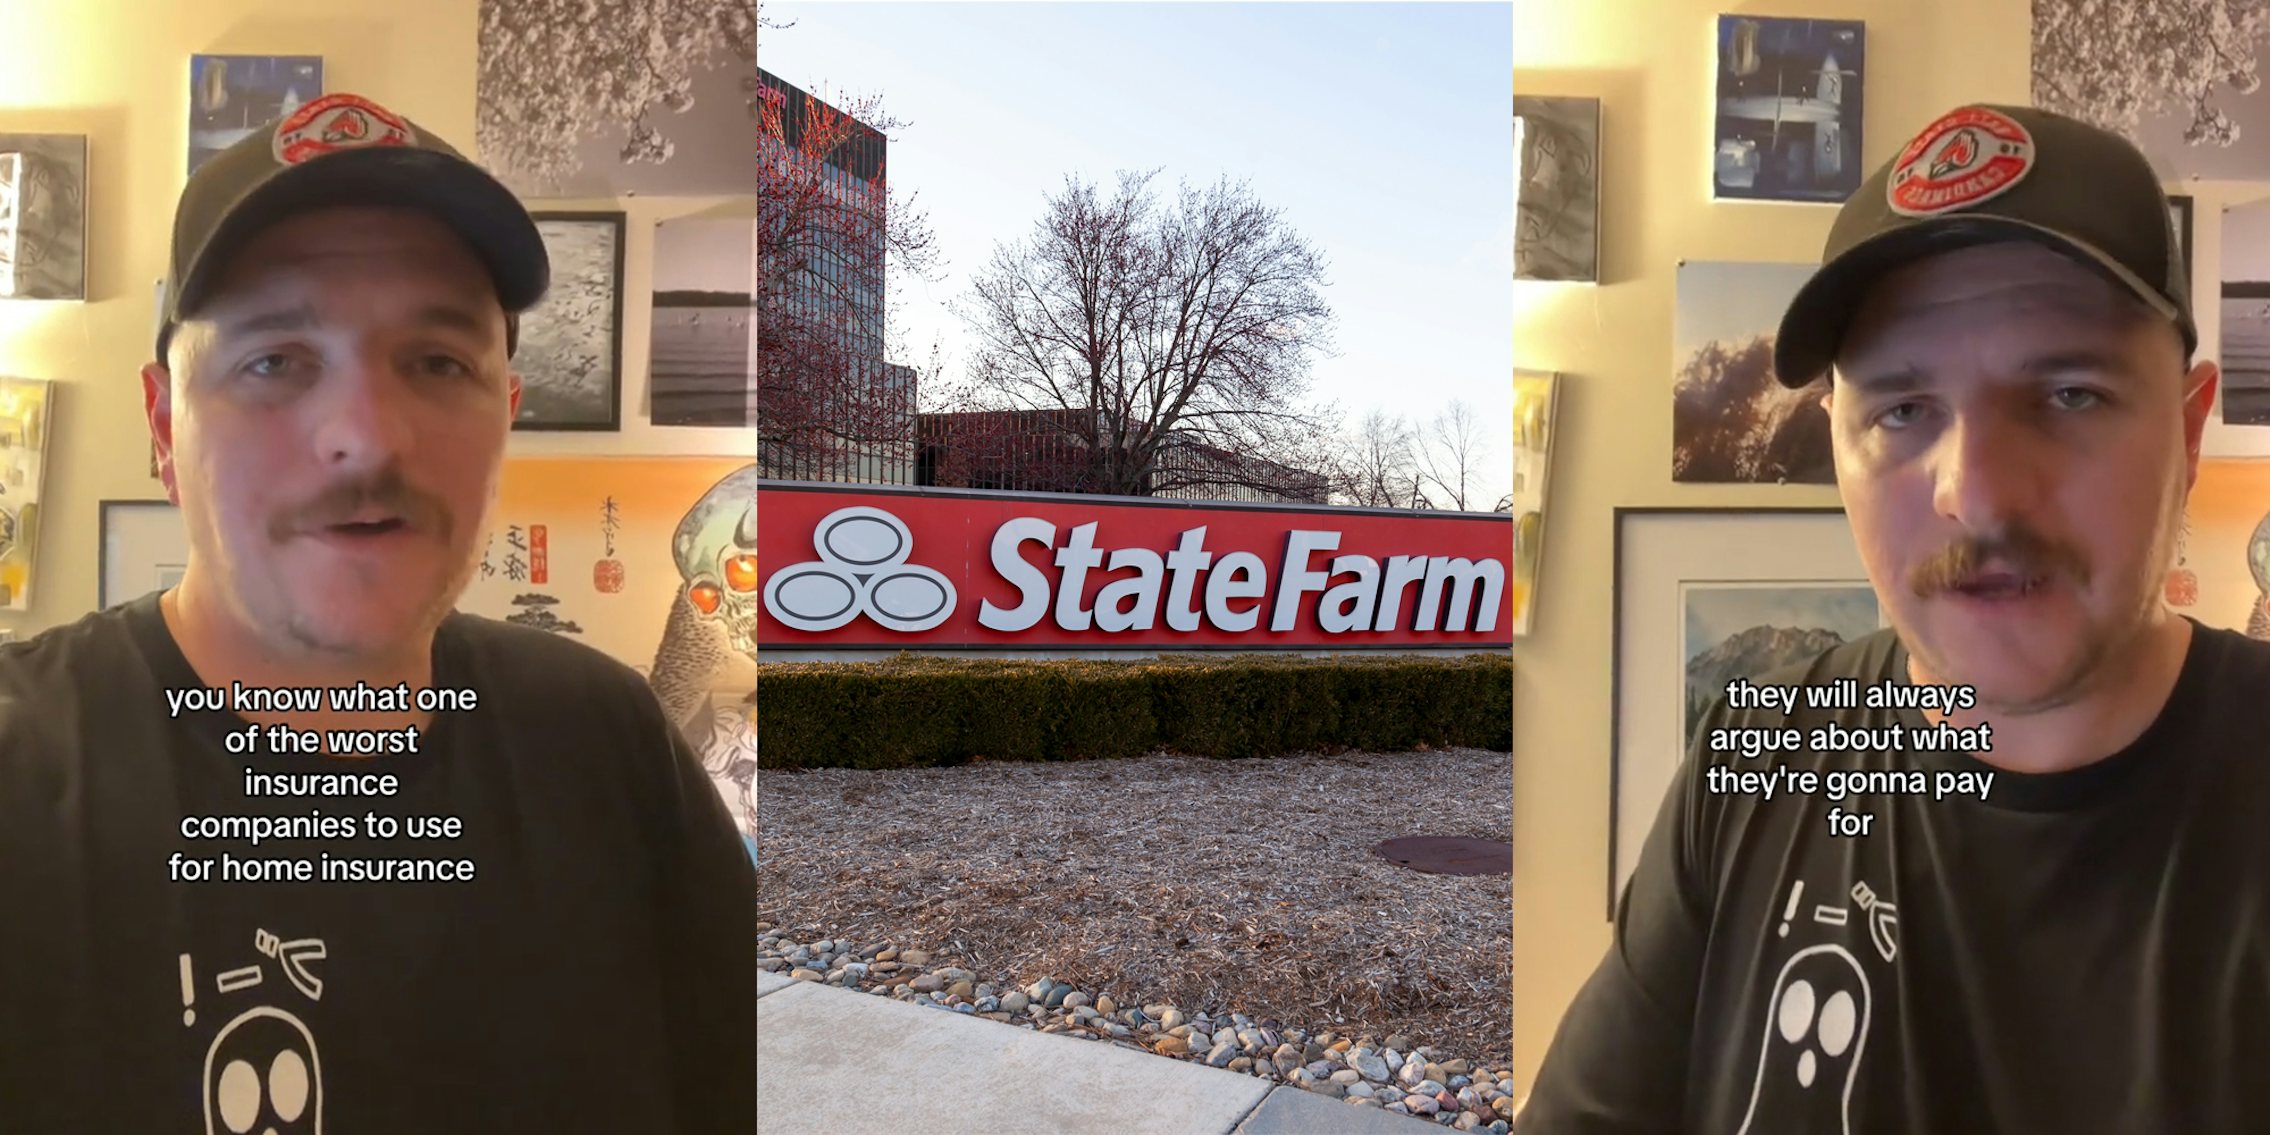 contractor speaking with caption 'you know what one of the worst insurance companies to use for home insurance' (l) State Farm sign outside of building (c) contractor speaking with caption 'they will always argue about what they're gonna pay for' (r)